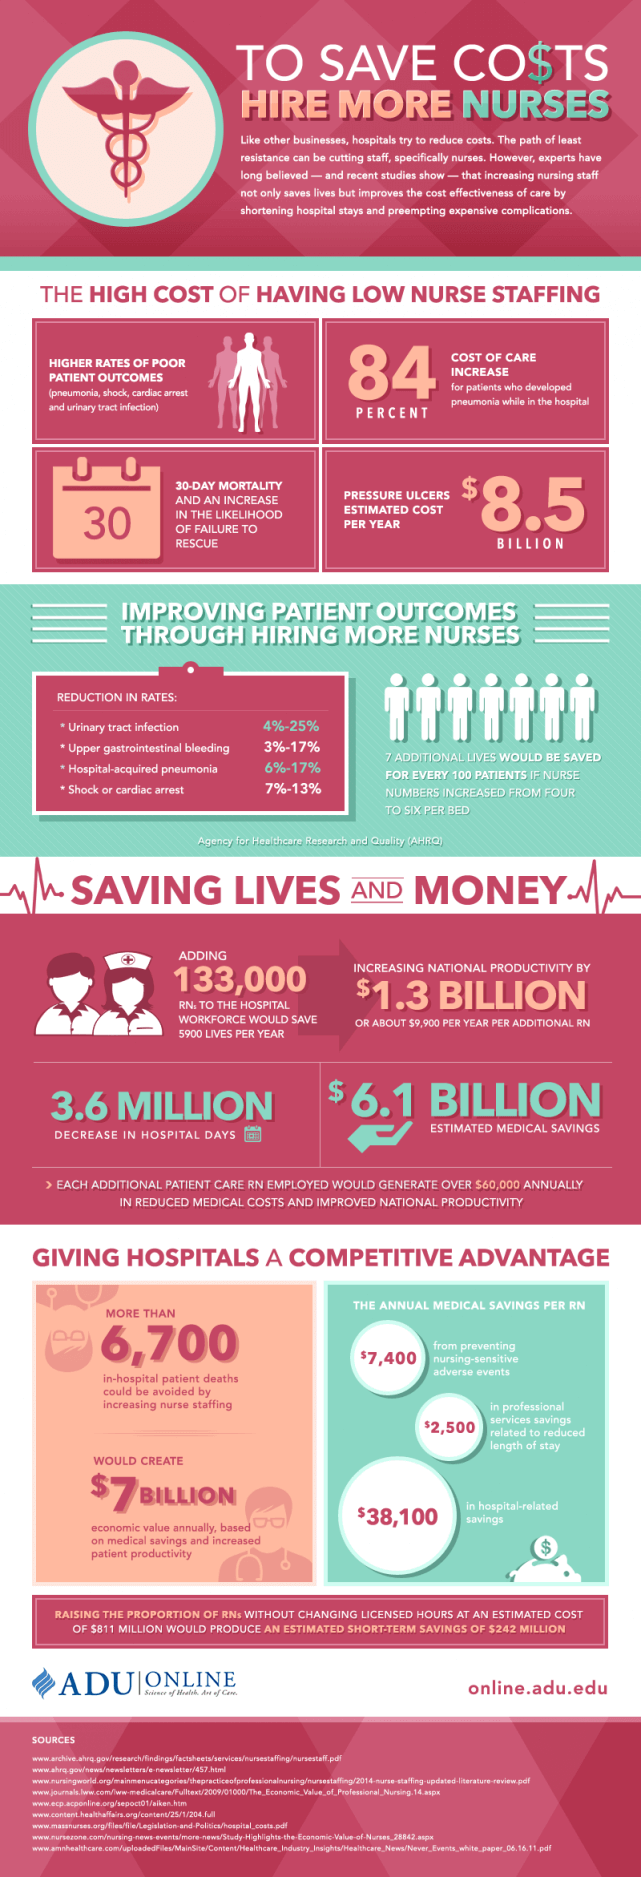 Offering Competitive Rates for Profitable Nurse Staffing